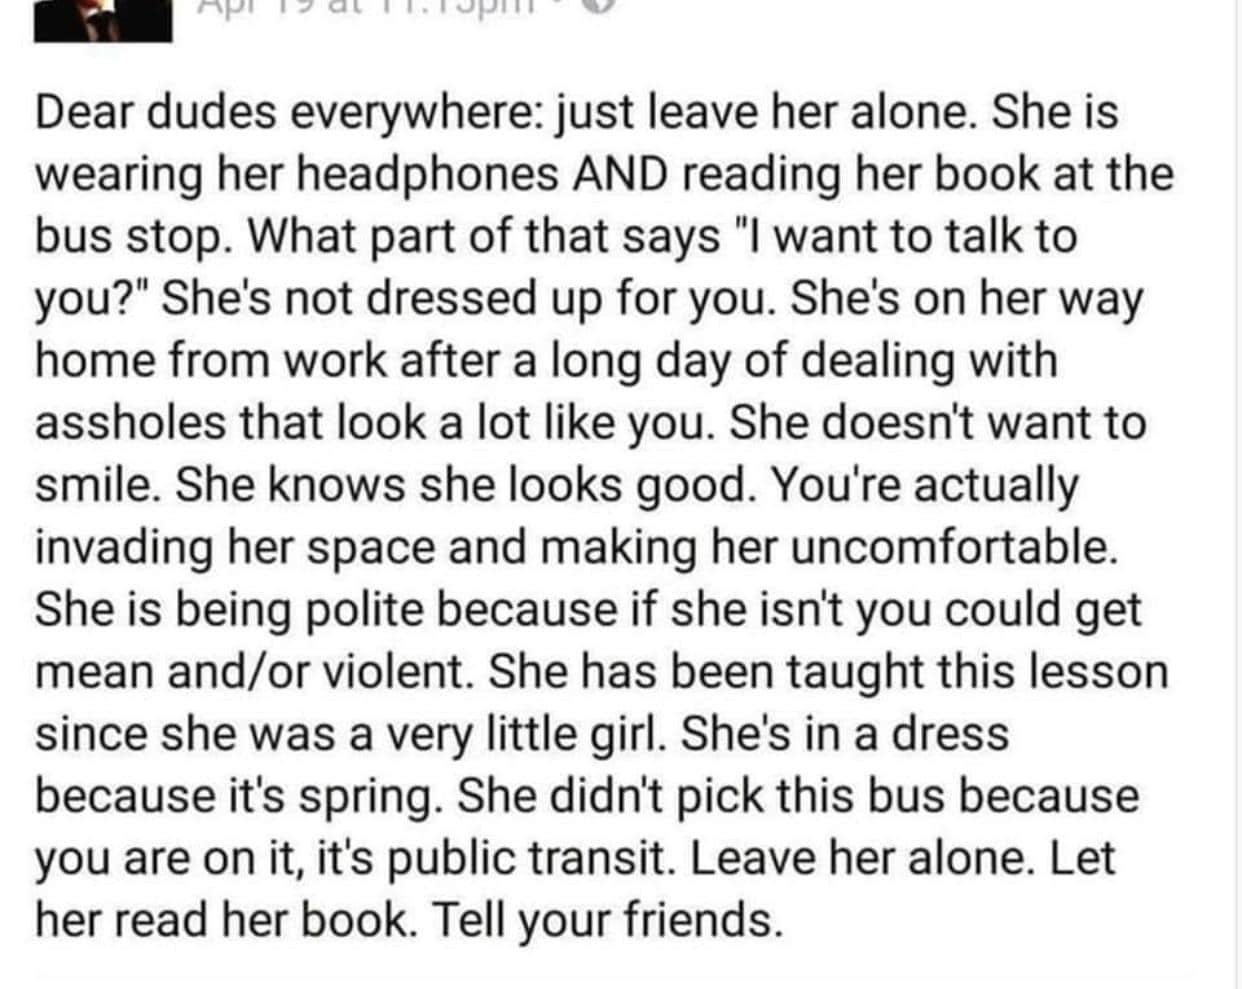 Women, TED, SIMP, Record, Latina feminine memes Women, TED, SIMP, Record, Latina text: Dear dudes everywhere: just leave her alone. She is wearing her headphones AND reading her book at the bus stop. What part of that says 